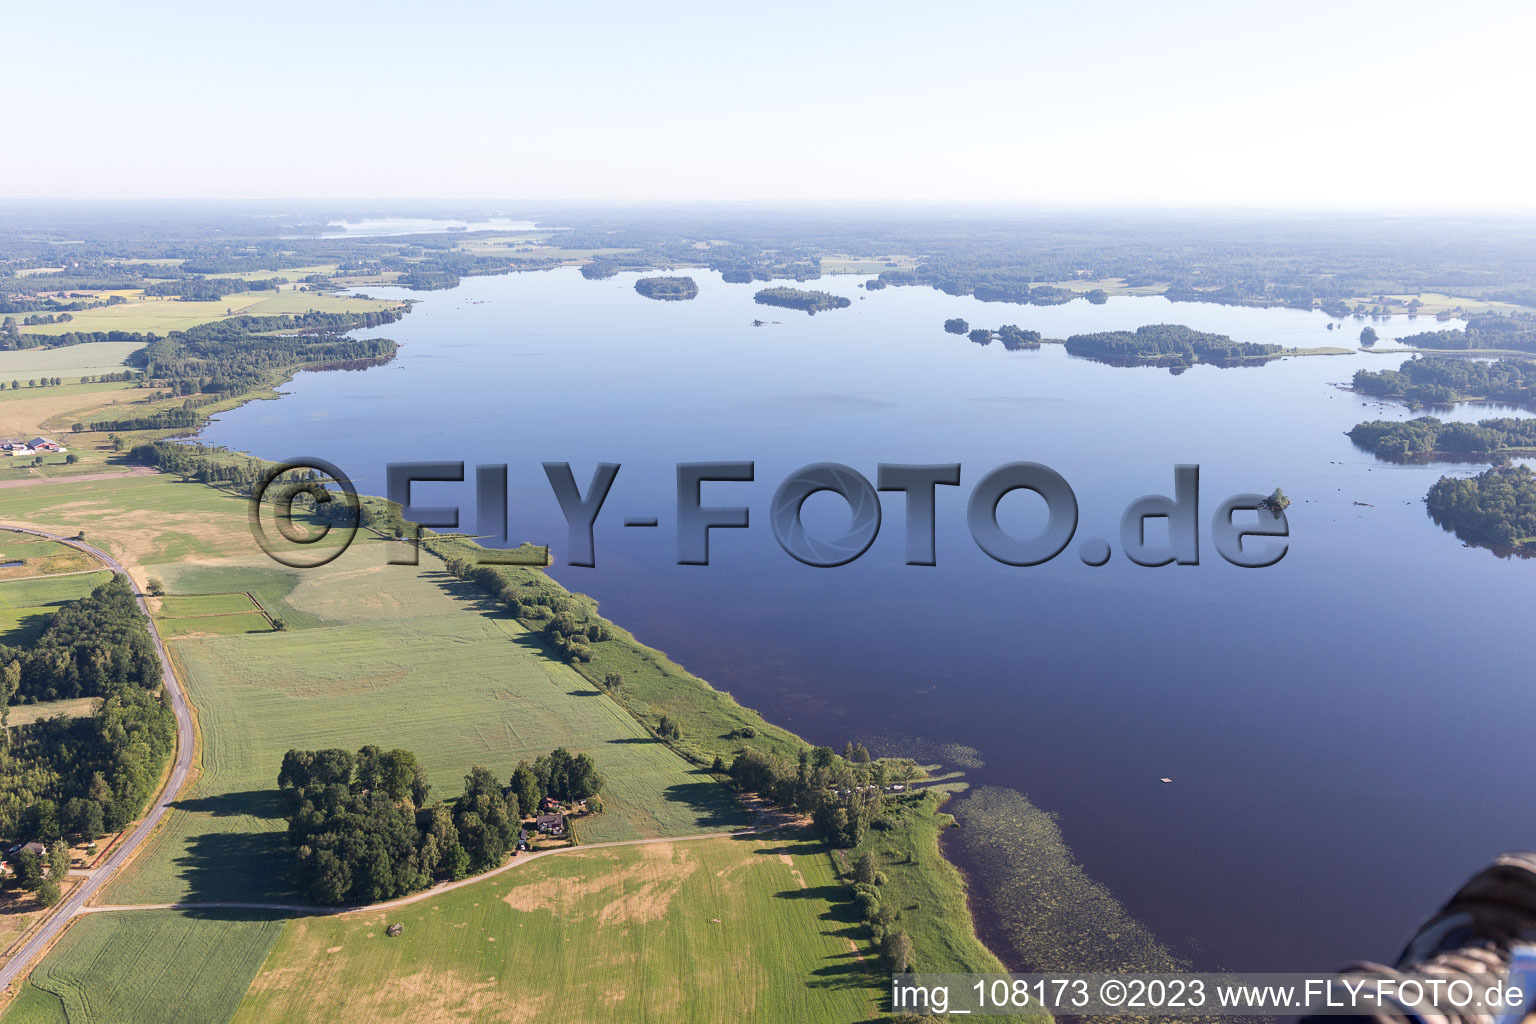 Torne in the state Kronoberg, Sweden seen from a drone